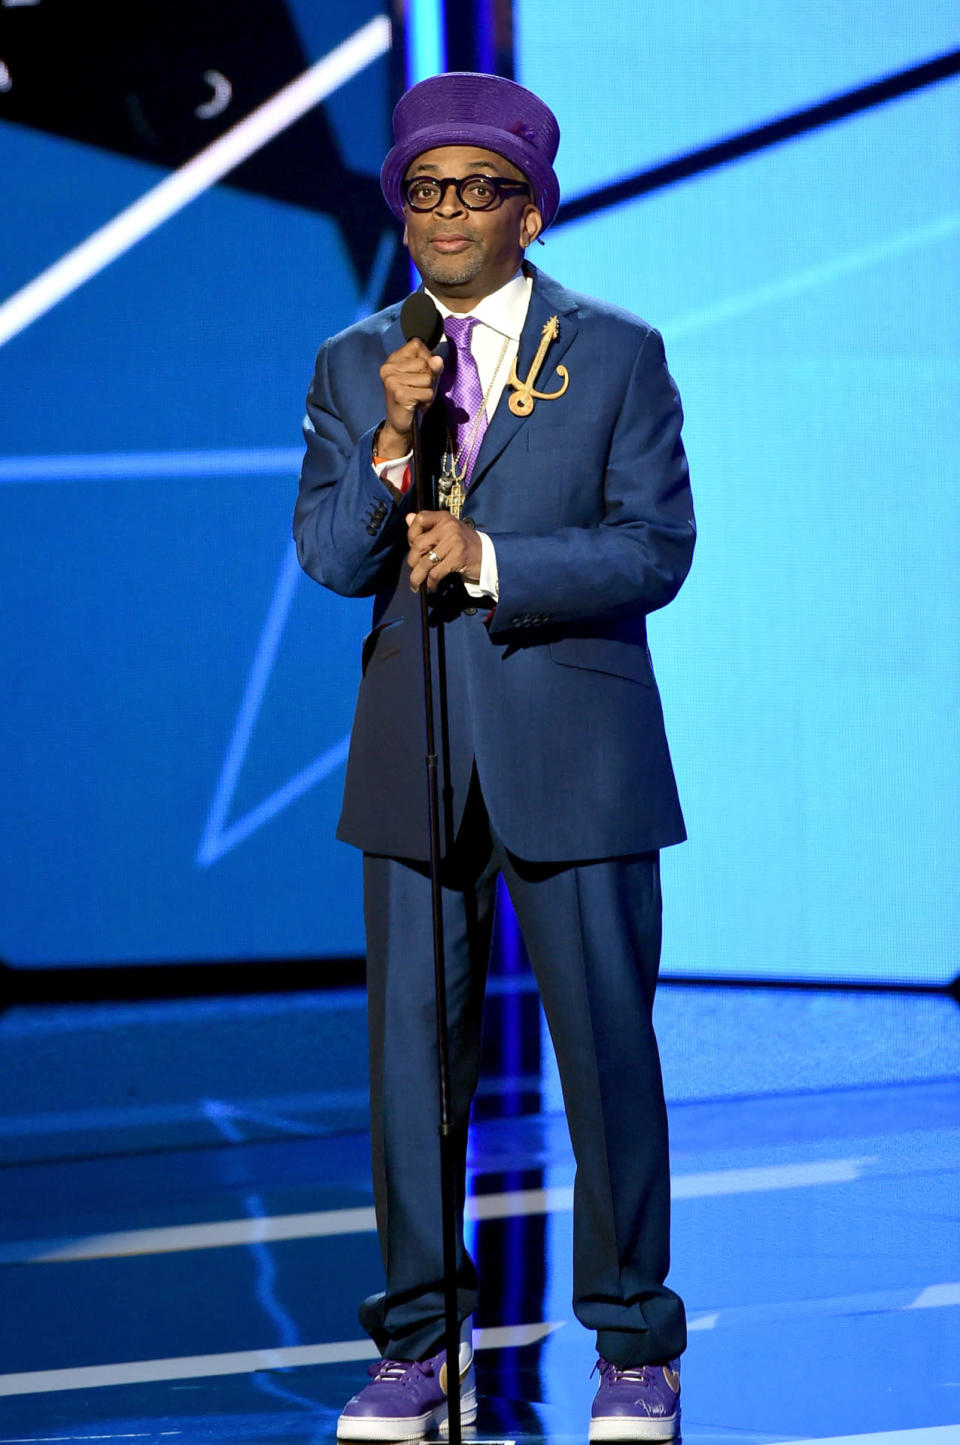 <p>Spike Lee, who gave Samuel L. Jackson his Lifetime Achievement Award, dressed to honor Prince in purple and yellow sneakers, purple tie, Prince symbol pin, and a top hat. Many compared the director’s honorific look to Willy Wonka. <i>(Photo: Getty Images)</i></p>